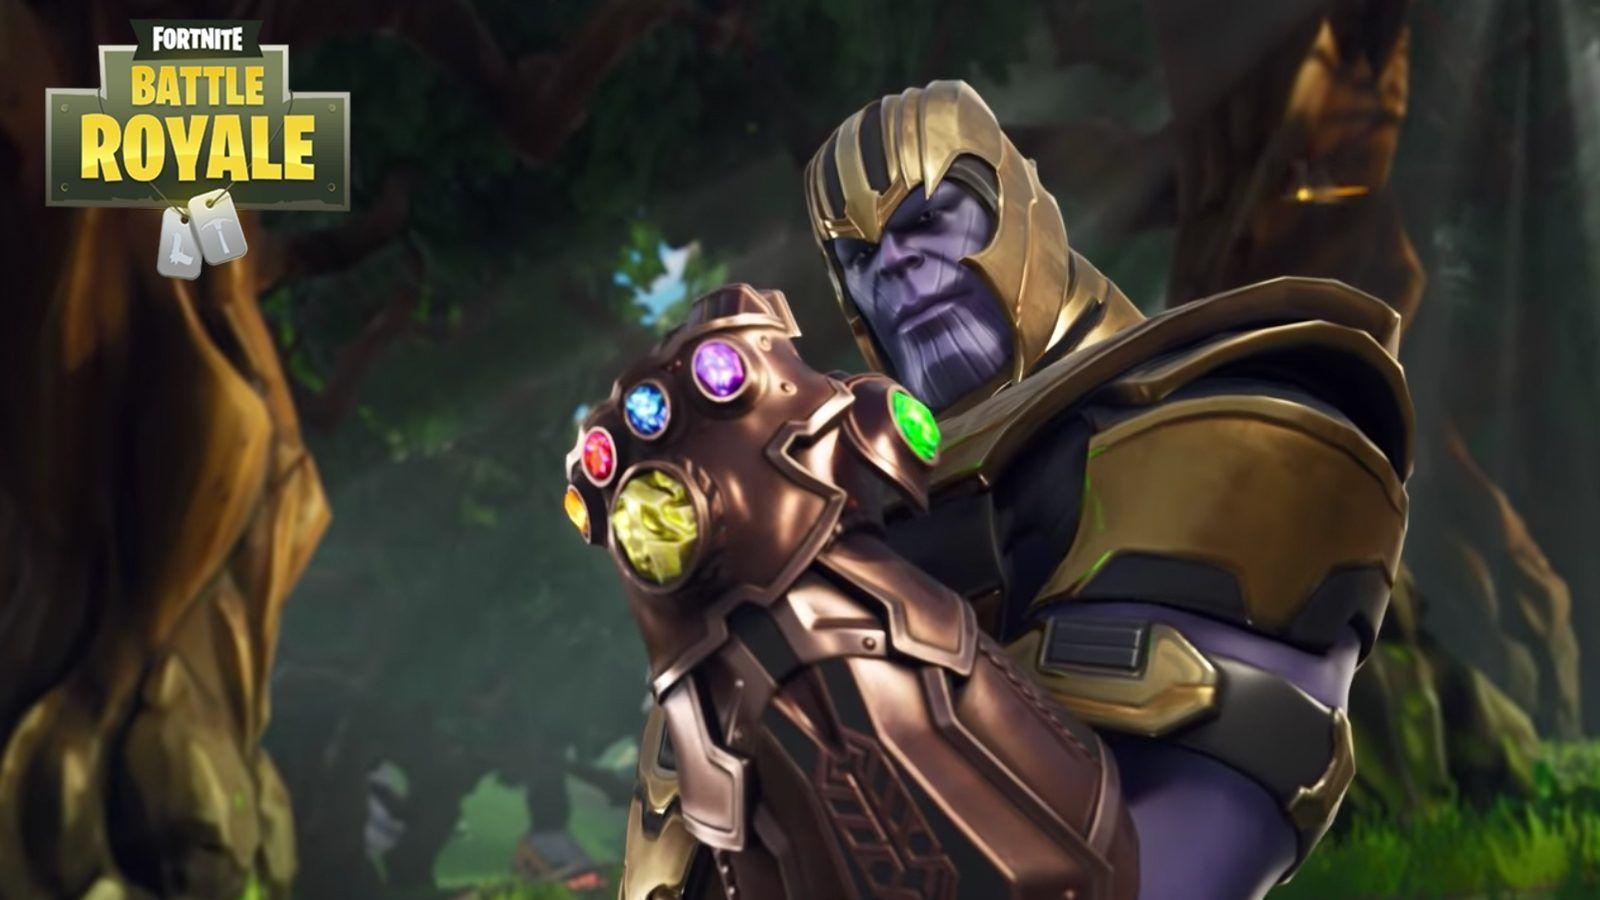 All Changes Announced to Thanos in Fortnite X Avengers Limited Time